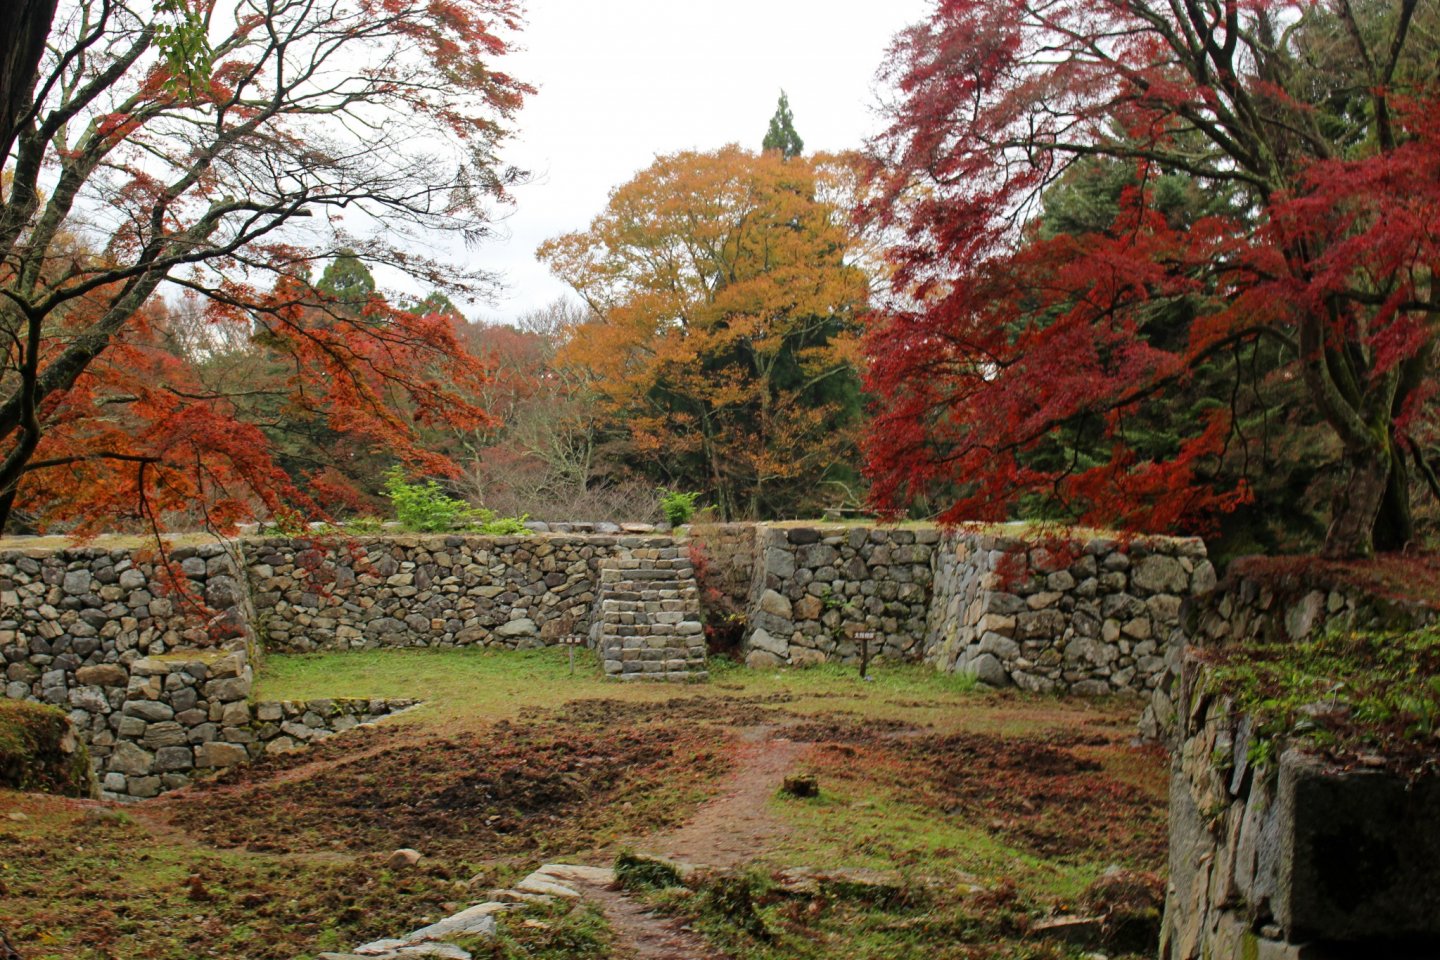 Autumn colors and the Taiko Turret/Jugokentamon Gate foundations fromm the bottom of the keep tower foundations